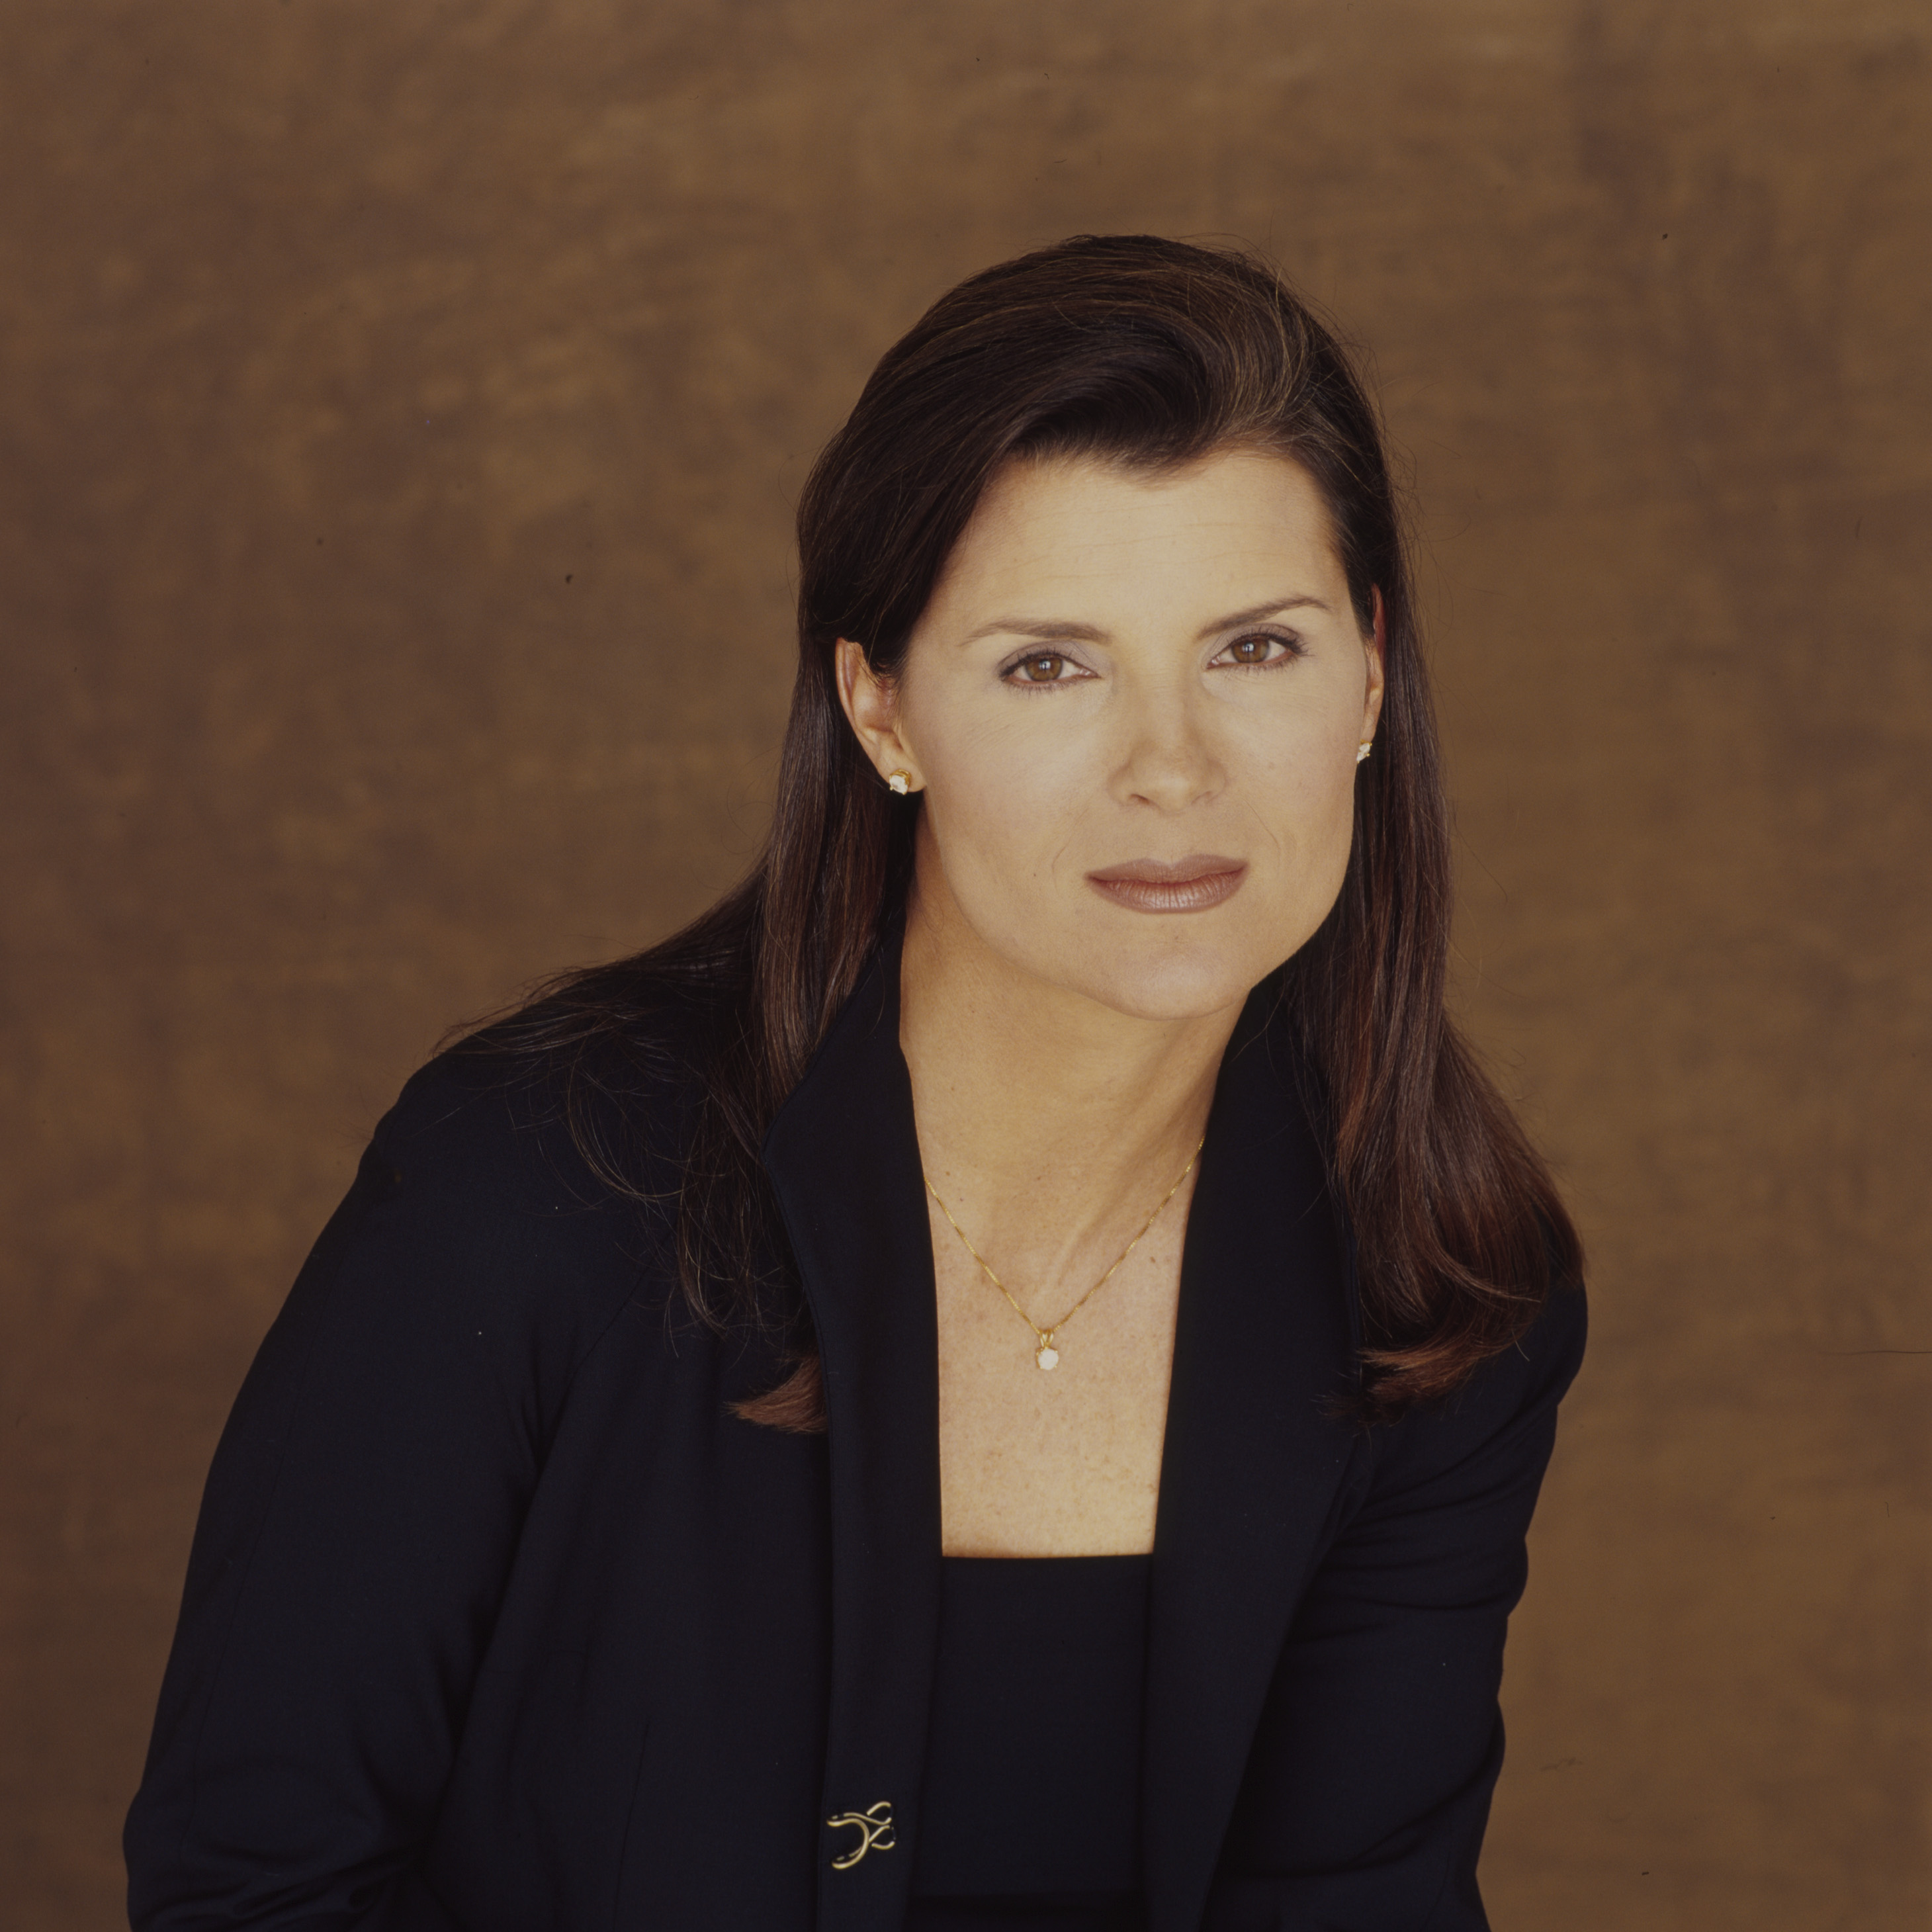 'The Bold and the Beautiful' star Kimberlin Brown wearing a navy blue suit and standing in front of a brown backdrop.